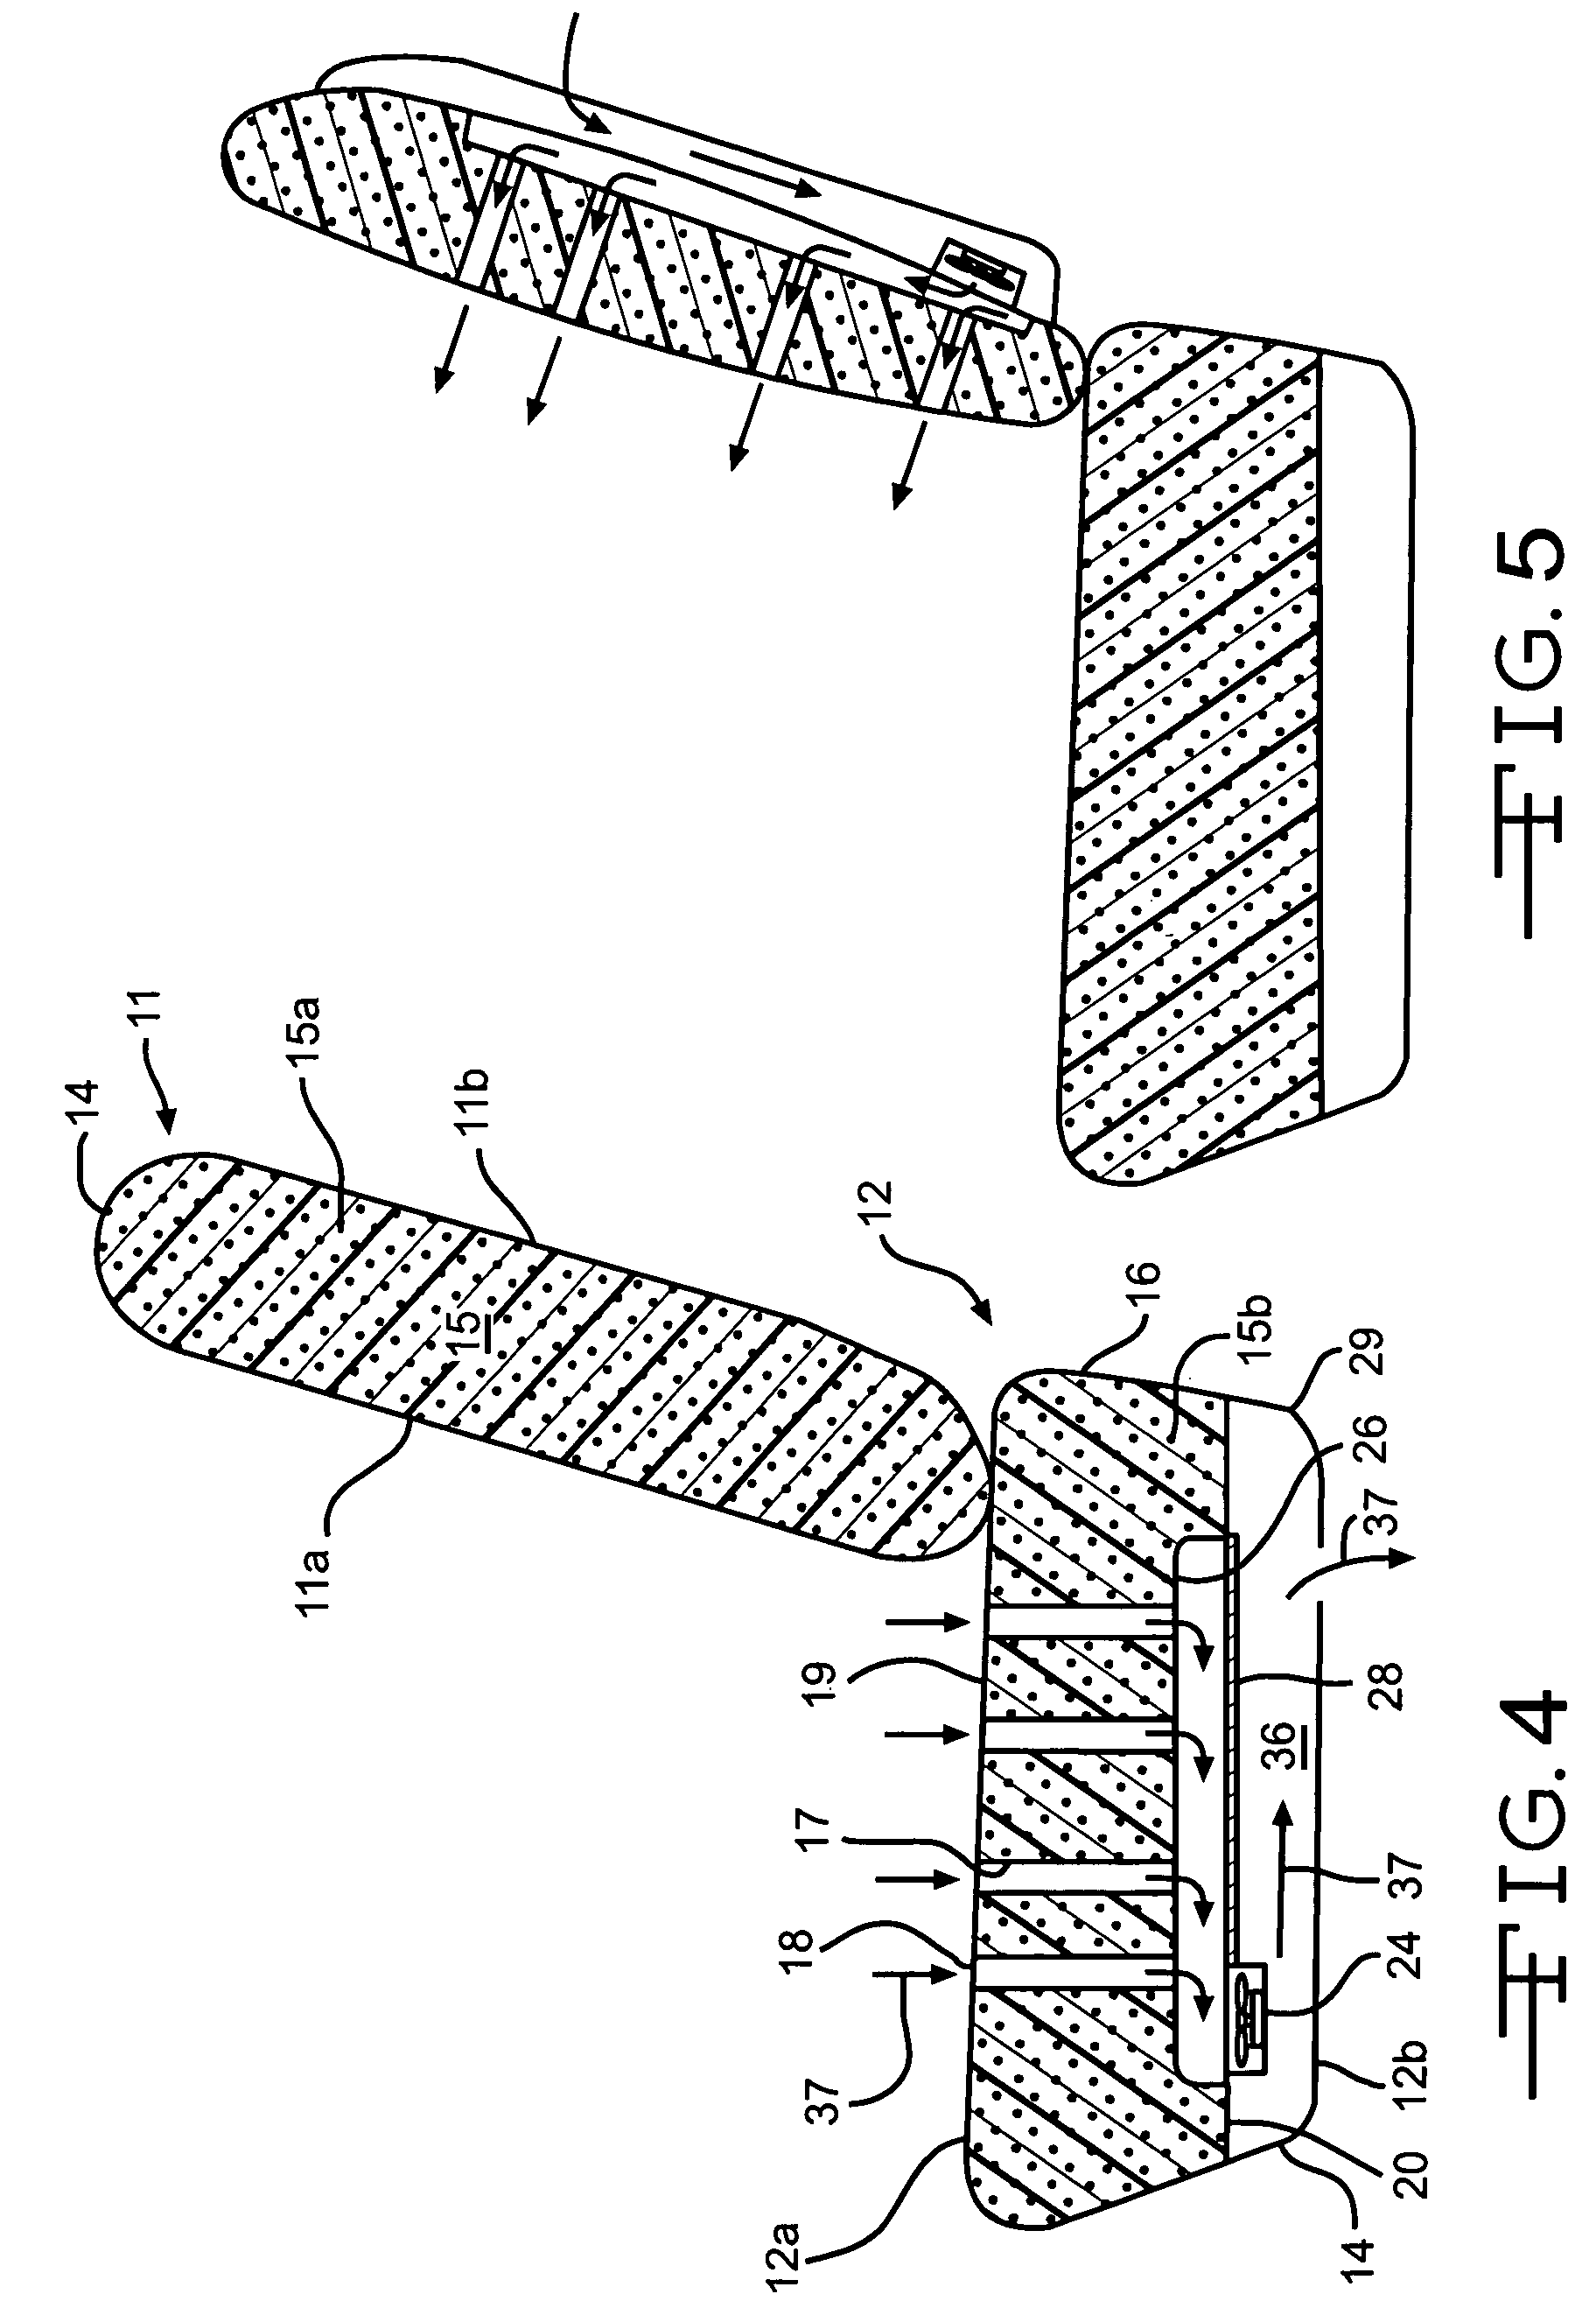 Flexible noise cover for a ventilated seat